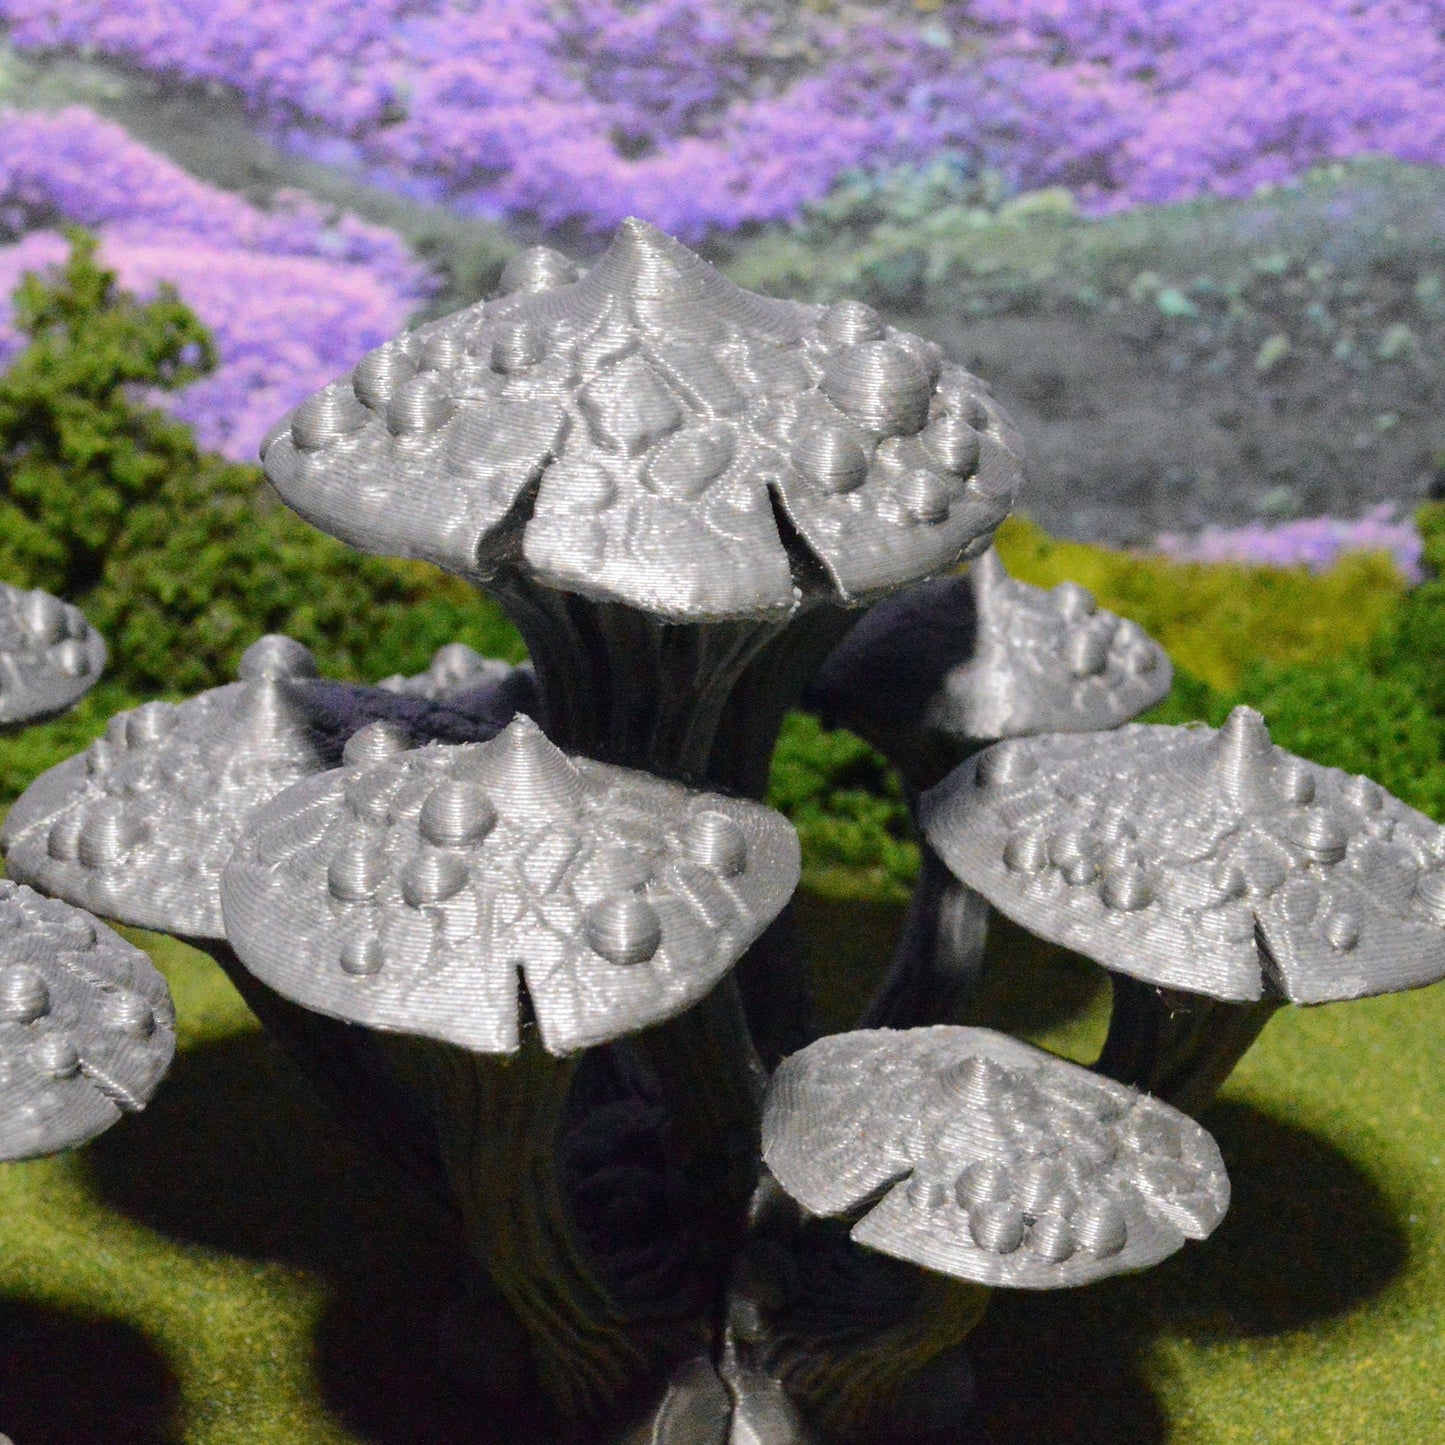 Magic Mushroom Clusters 15mm 28mm for D&D Terrain, DnD Pathfinder Underdark Fantasy Cavern Fungi, Out of the Abyss